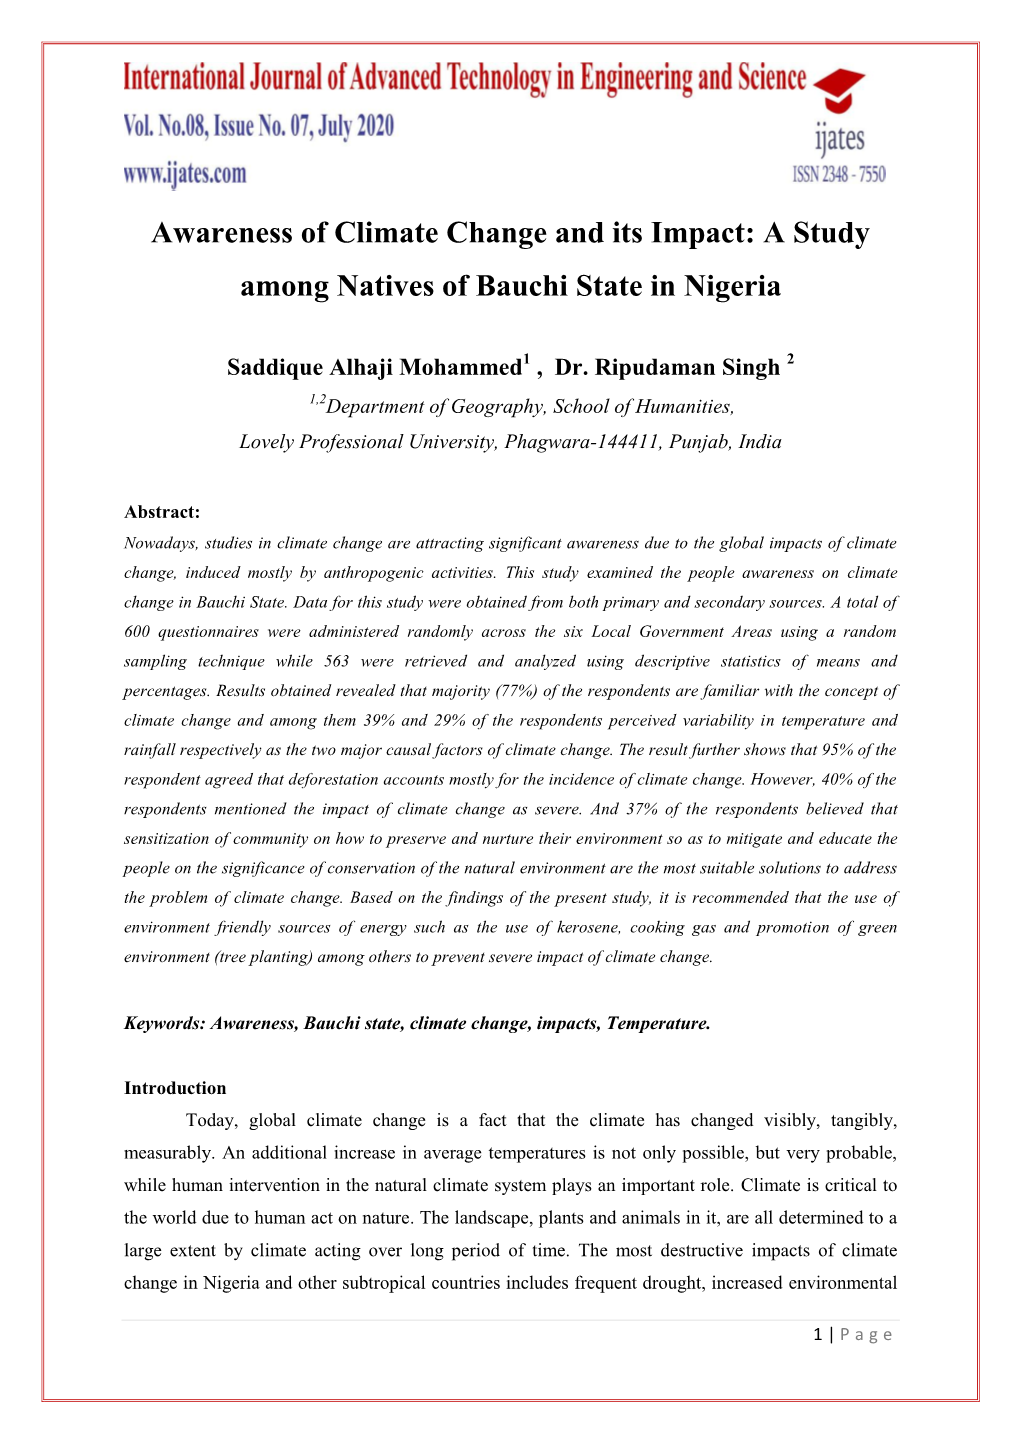 Awareness of Climate Change and Its Impact: a Study Among Natives of Bauchi State in Nigeria